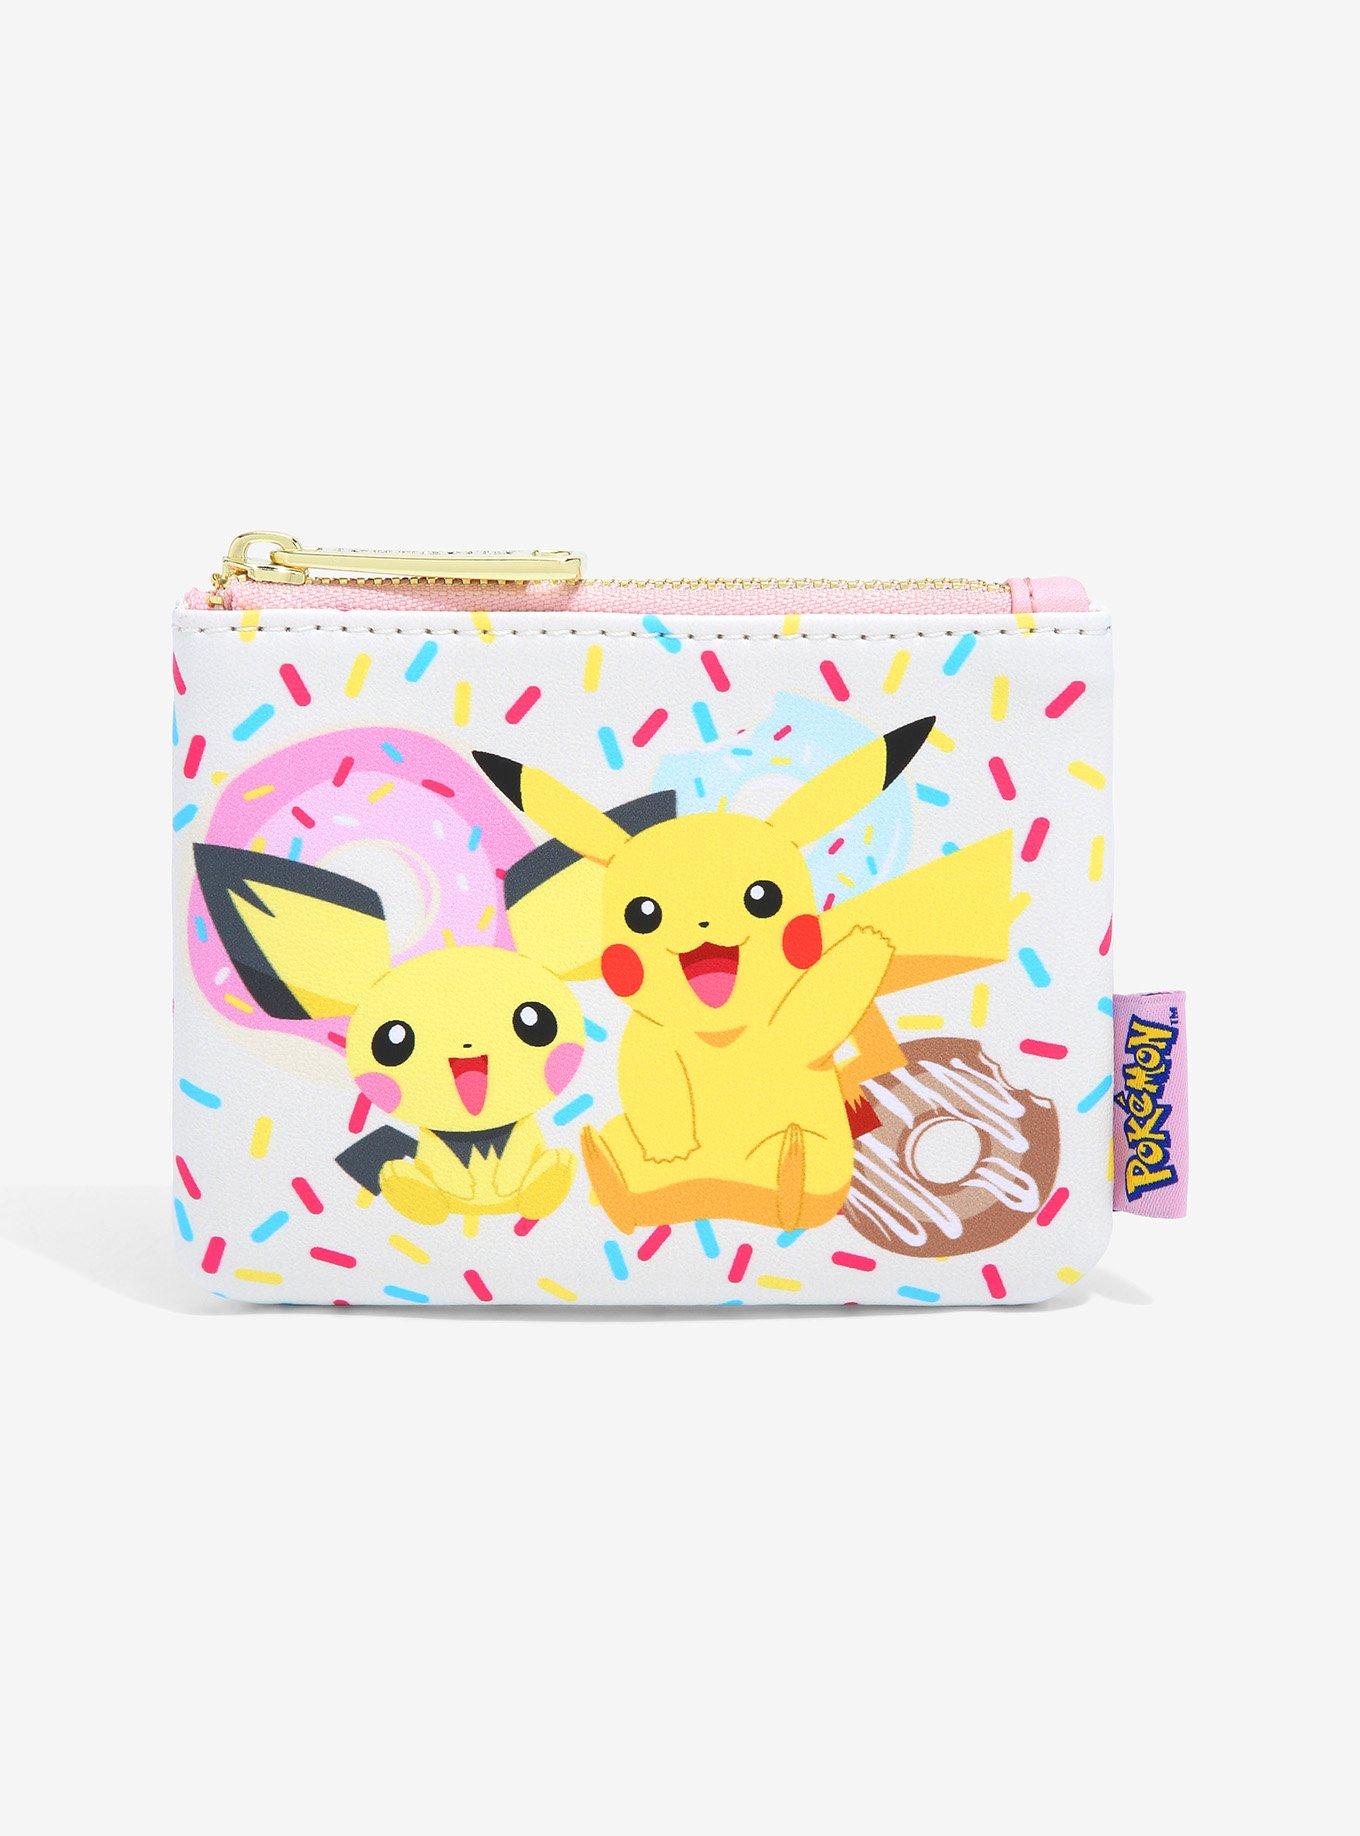 POKÉMON PIKACHU SEPIA LOUNGEFLY FLAP WALLET - Occasions Hallmark Gifts and  More